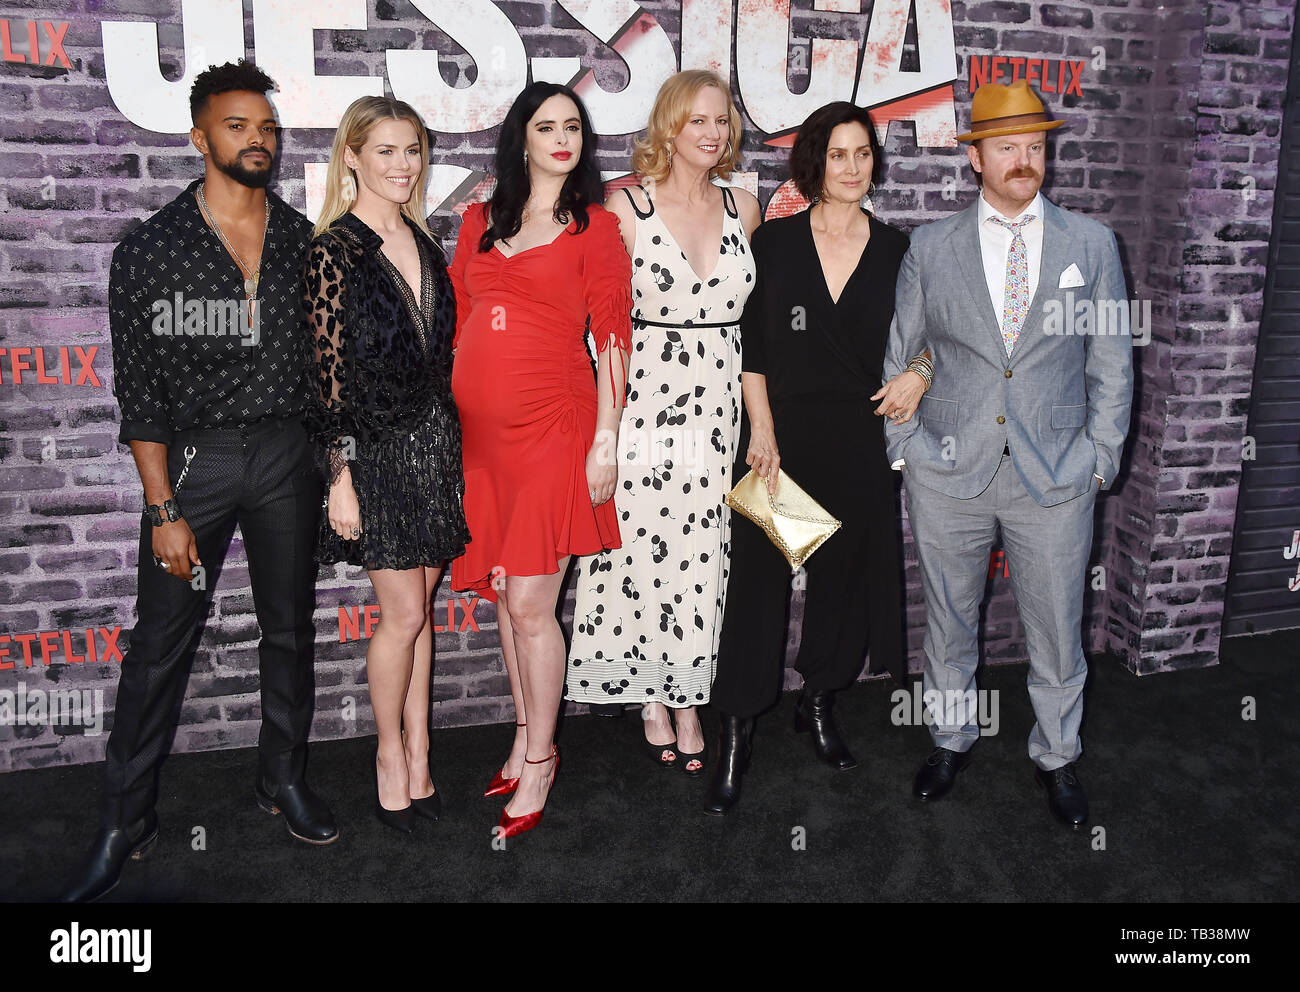 HOLLYWOOD, CA - MAY 28: (L-R) Eka Darville, Rachael Taylor, Krysten Ritter, Melissa Rosenberg, Carrie-Anne Moss and Jeremy Bobb attend a Special Screening Of Netflix's 'Jessica Jones' Season 3 at ArcLight Hollywood on May 28, 2019 in Hollywood, California. Stock Photo